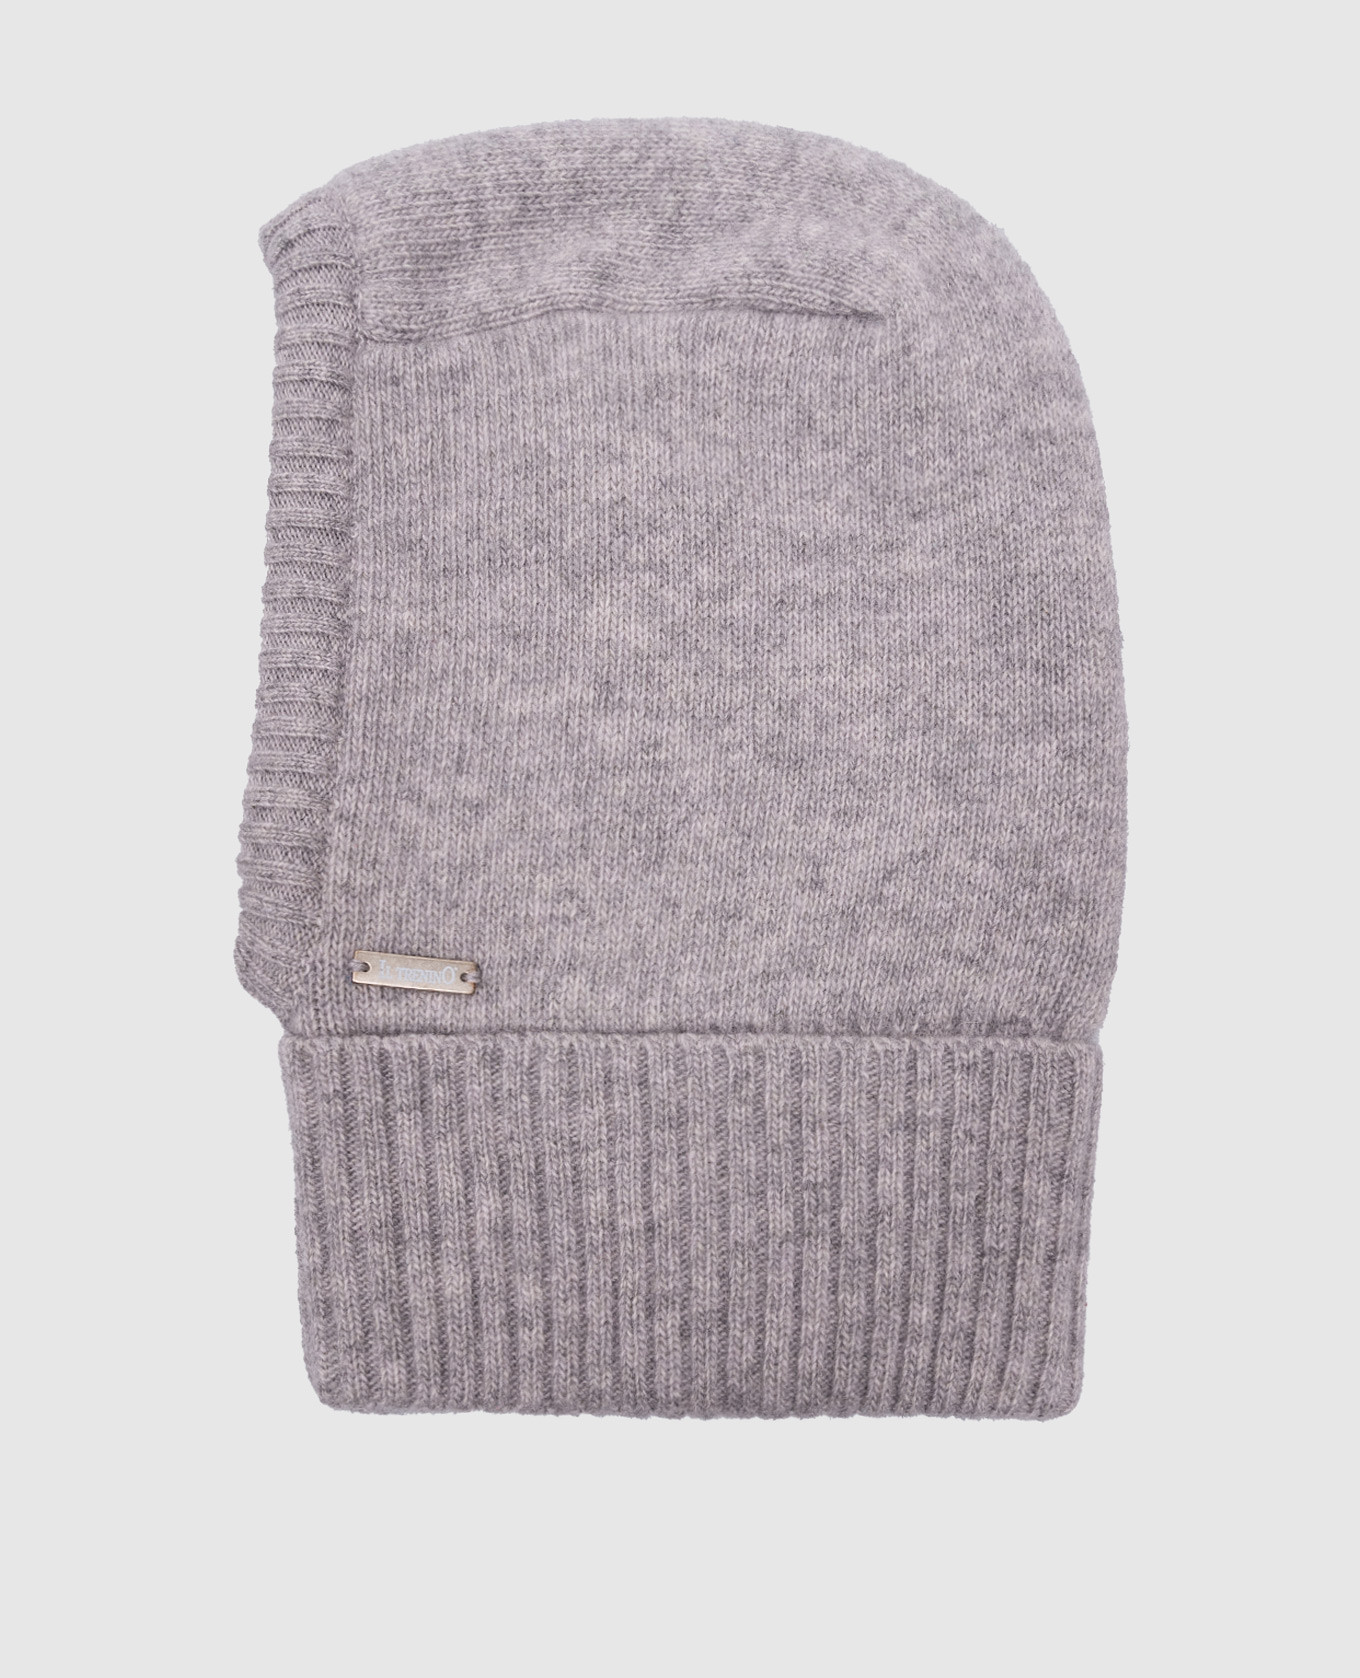 Children's gray cap-helmet made of wool and cashmere